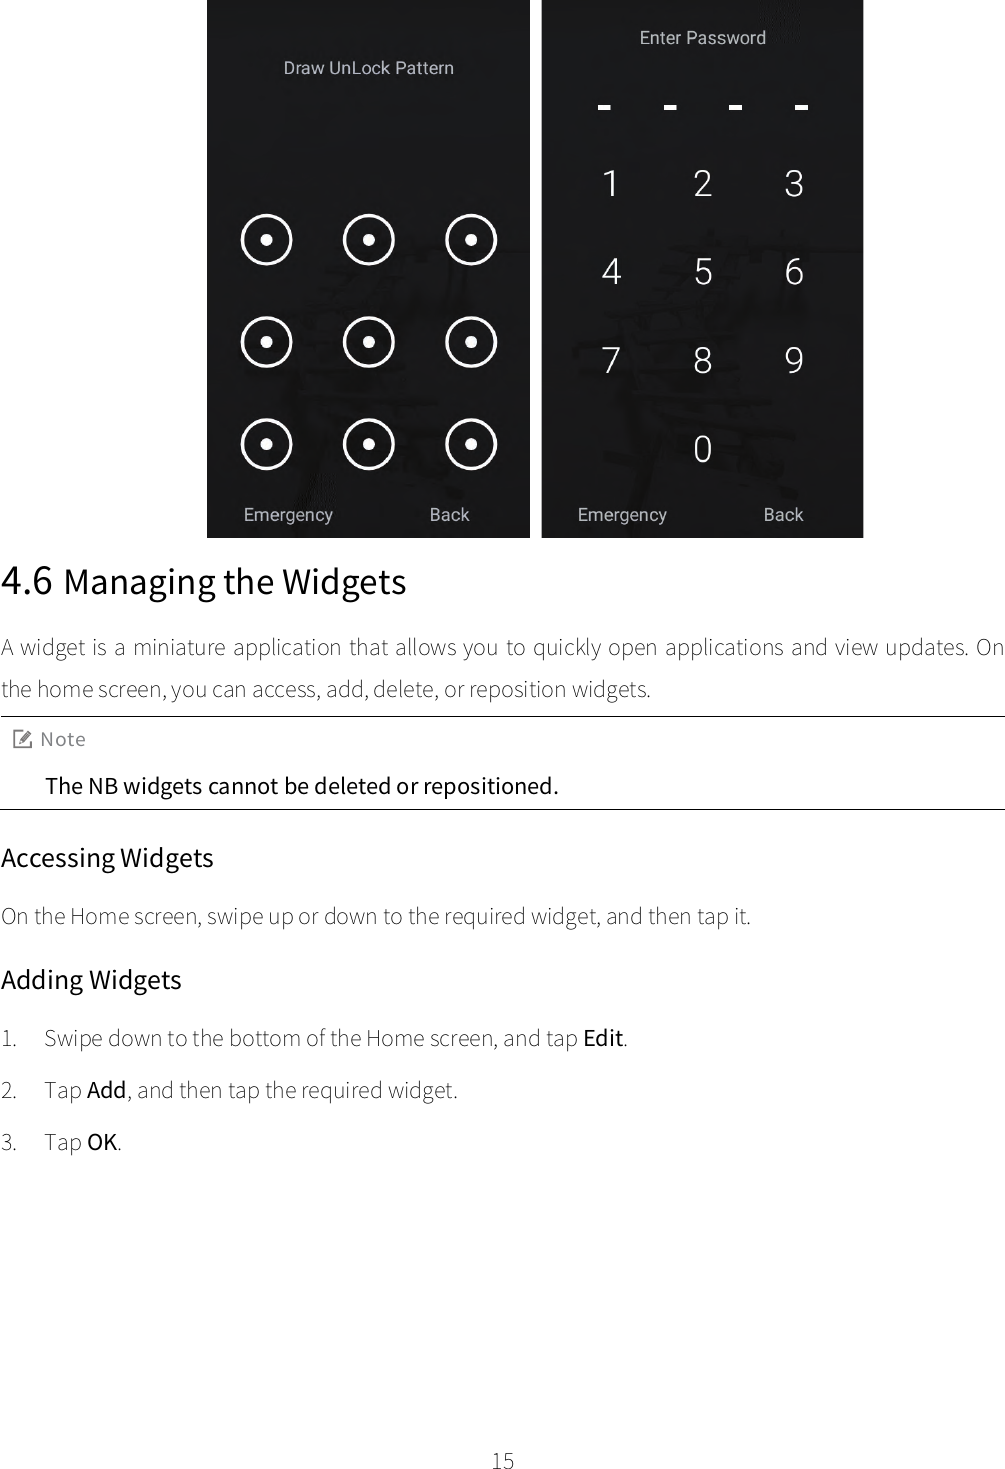    15  4.6 Managing the Widgets A widget is a miniature application that allows you to quickly open applications and view updates. On the home screen, you can access, add, delete, or reposition widgets. Note The NB widgets cannot be deleted or repositioned. Accessing Widgets On the Home screen, swipe up or down to the required widget, and then tap it. Adding Widgets 1. Swipe down to the bottom of the Home screen, and tap Edit. 2. Tap Add, and then tap the required widget. 3. Tap OK. 